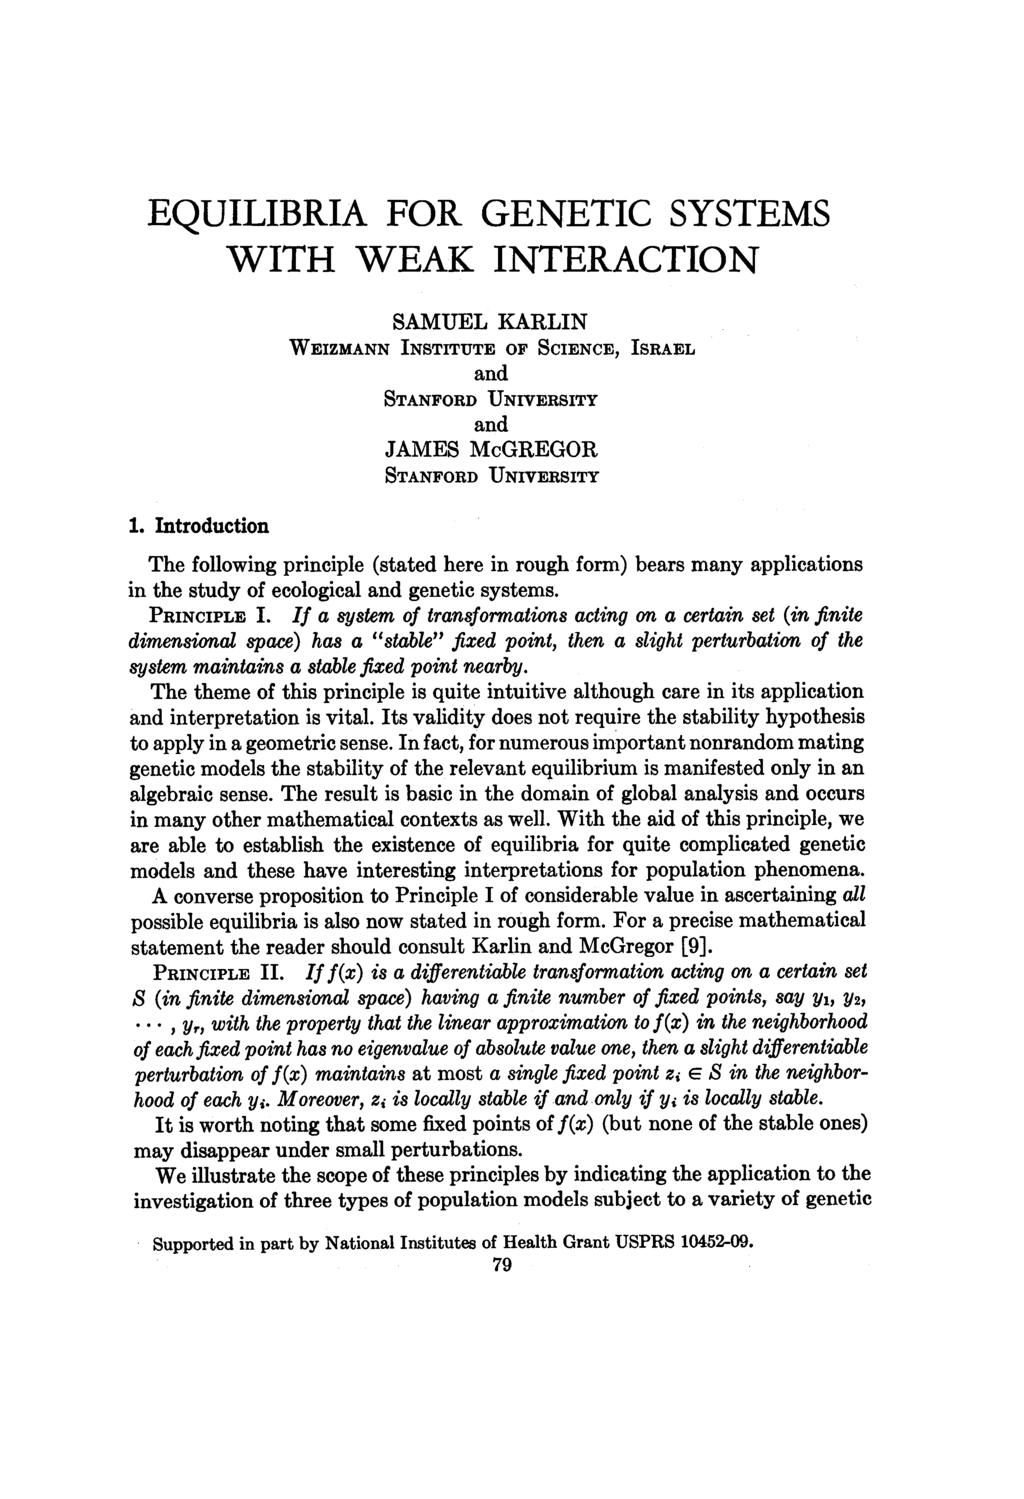 EQUILIBRIA FOR GENETIC SYSTEMS WITH WEAK INTERACTION SAMUEL KARLIN WEIZMANN INSTITUTE OF SCIENCE, ISRAEL and STANFORD UNIVERSITY and JAMES McGREGOR STANFORD UNIVERSITY 1.